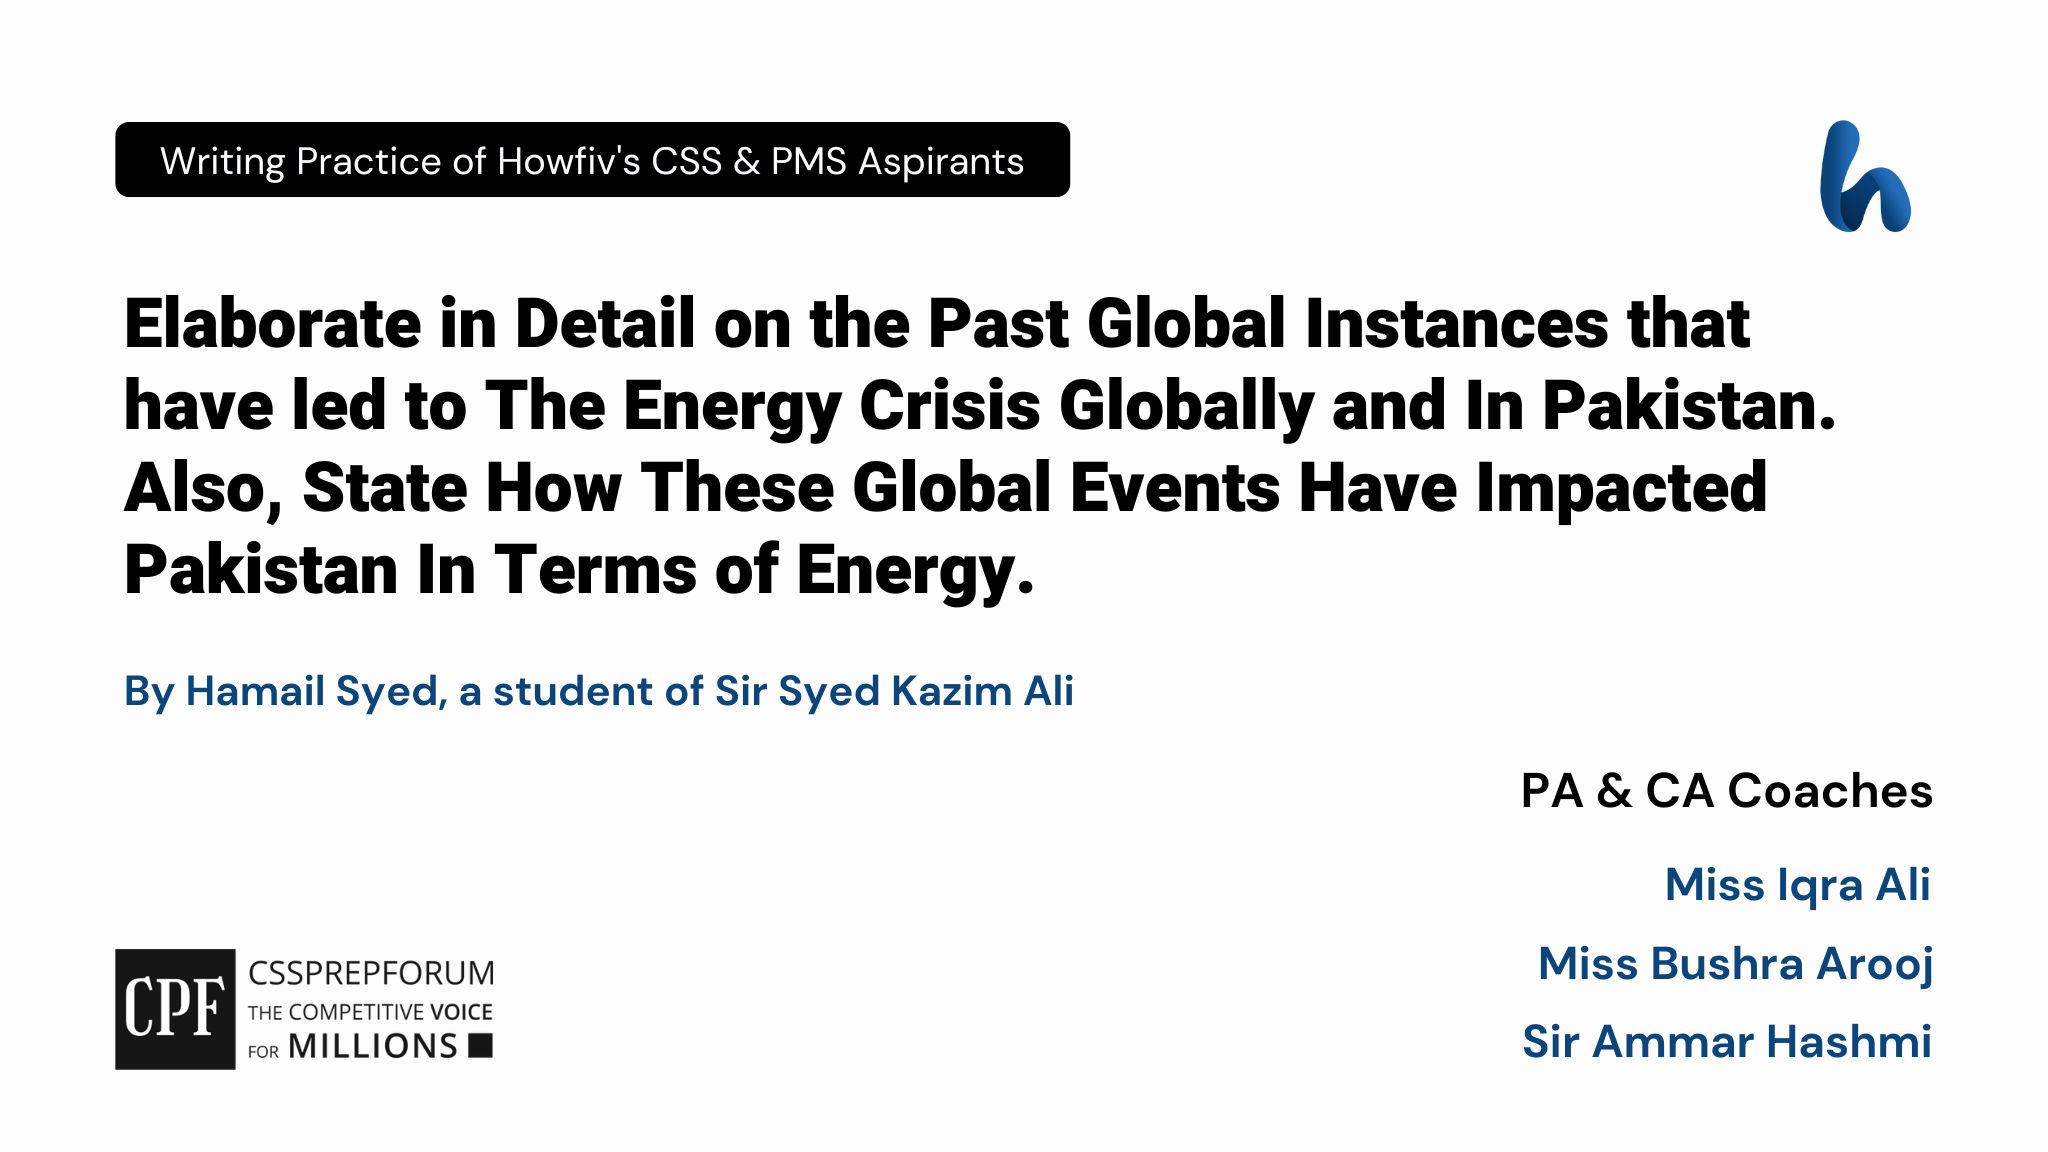 CSS Current Affairs article | Impacts of Past Instances on The Global and National Energy Crisis | is written by Hamail Syed under the supervision of Sir Ammar Hashmi...